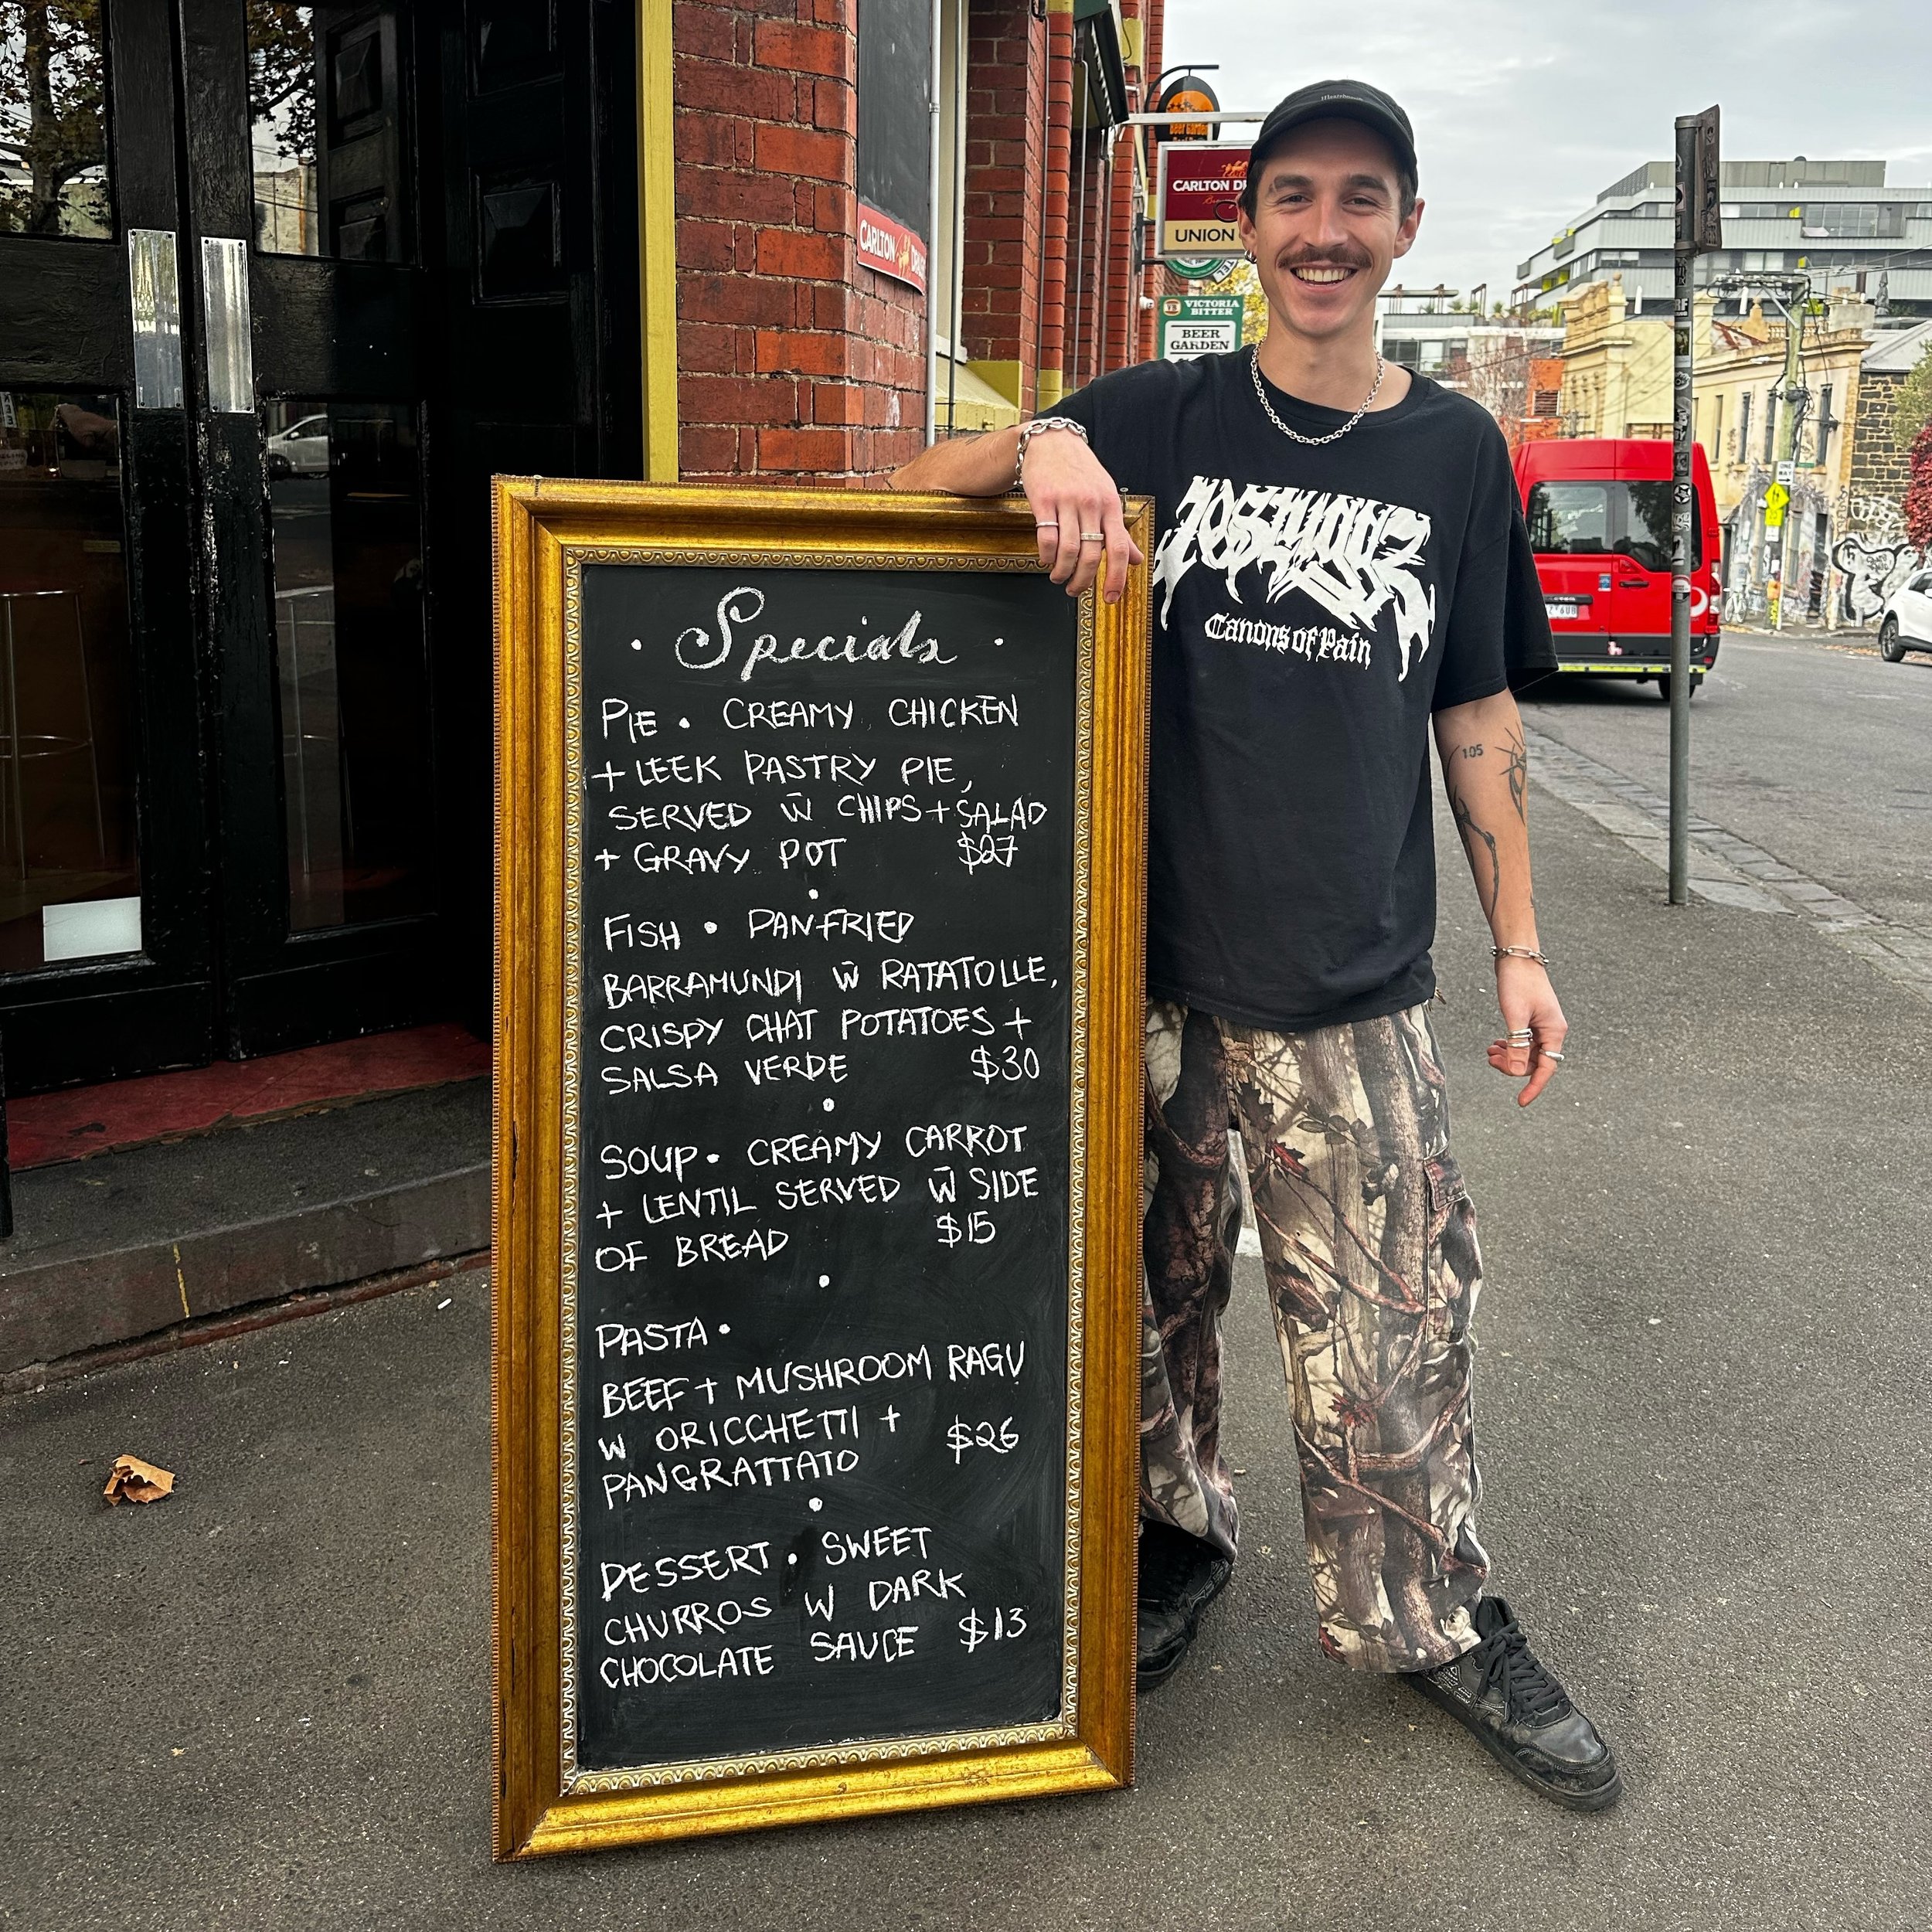 This week&rsquo;s specials! Ft. Nic&rsquo;s disappearing legs! 

.
.
.
.
.
.
.
.
.
.
.

#Fitzroy #Pub #Menu #PubGrub